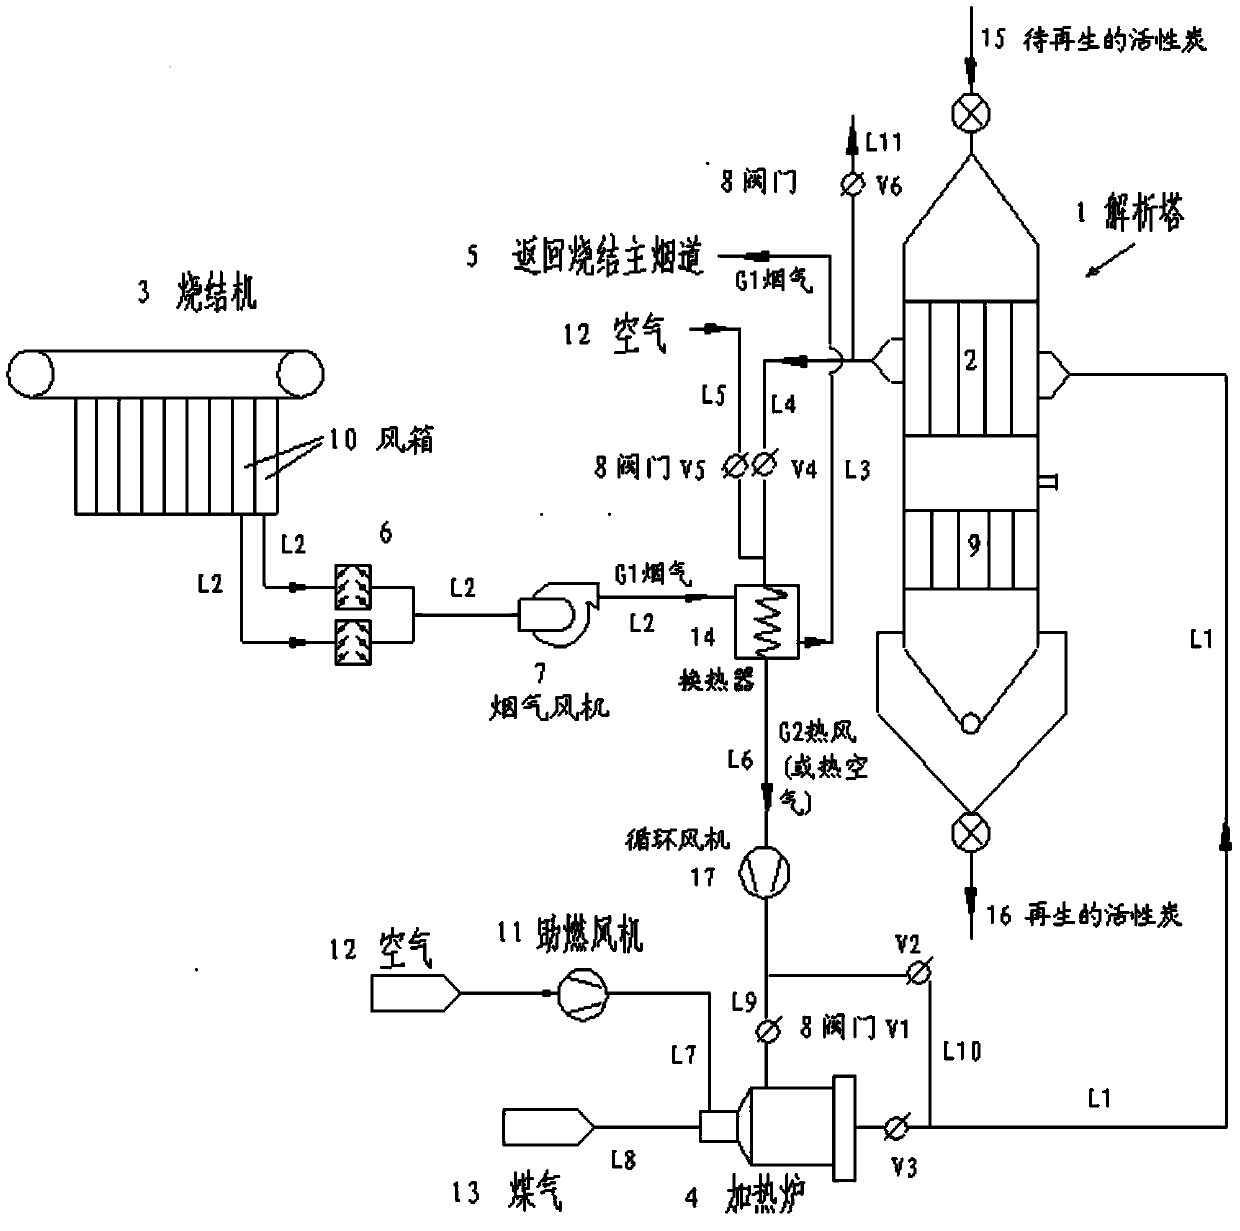 Thermal regeneration method and device of activated carbon